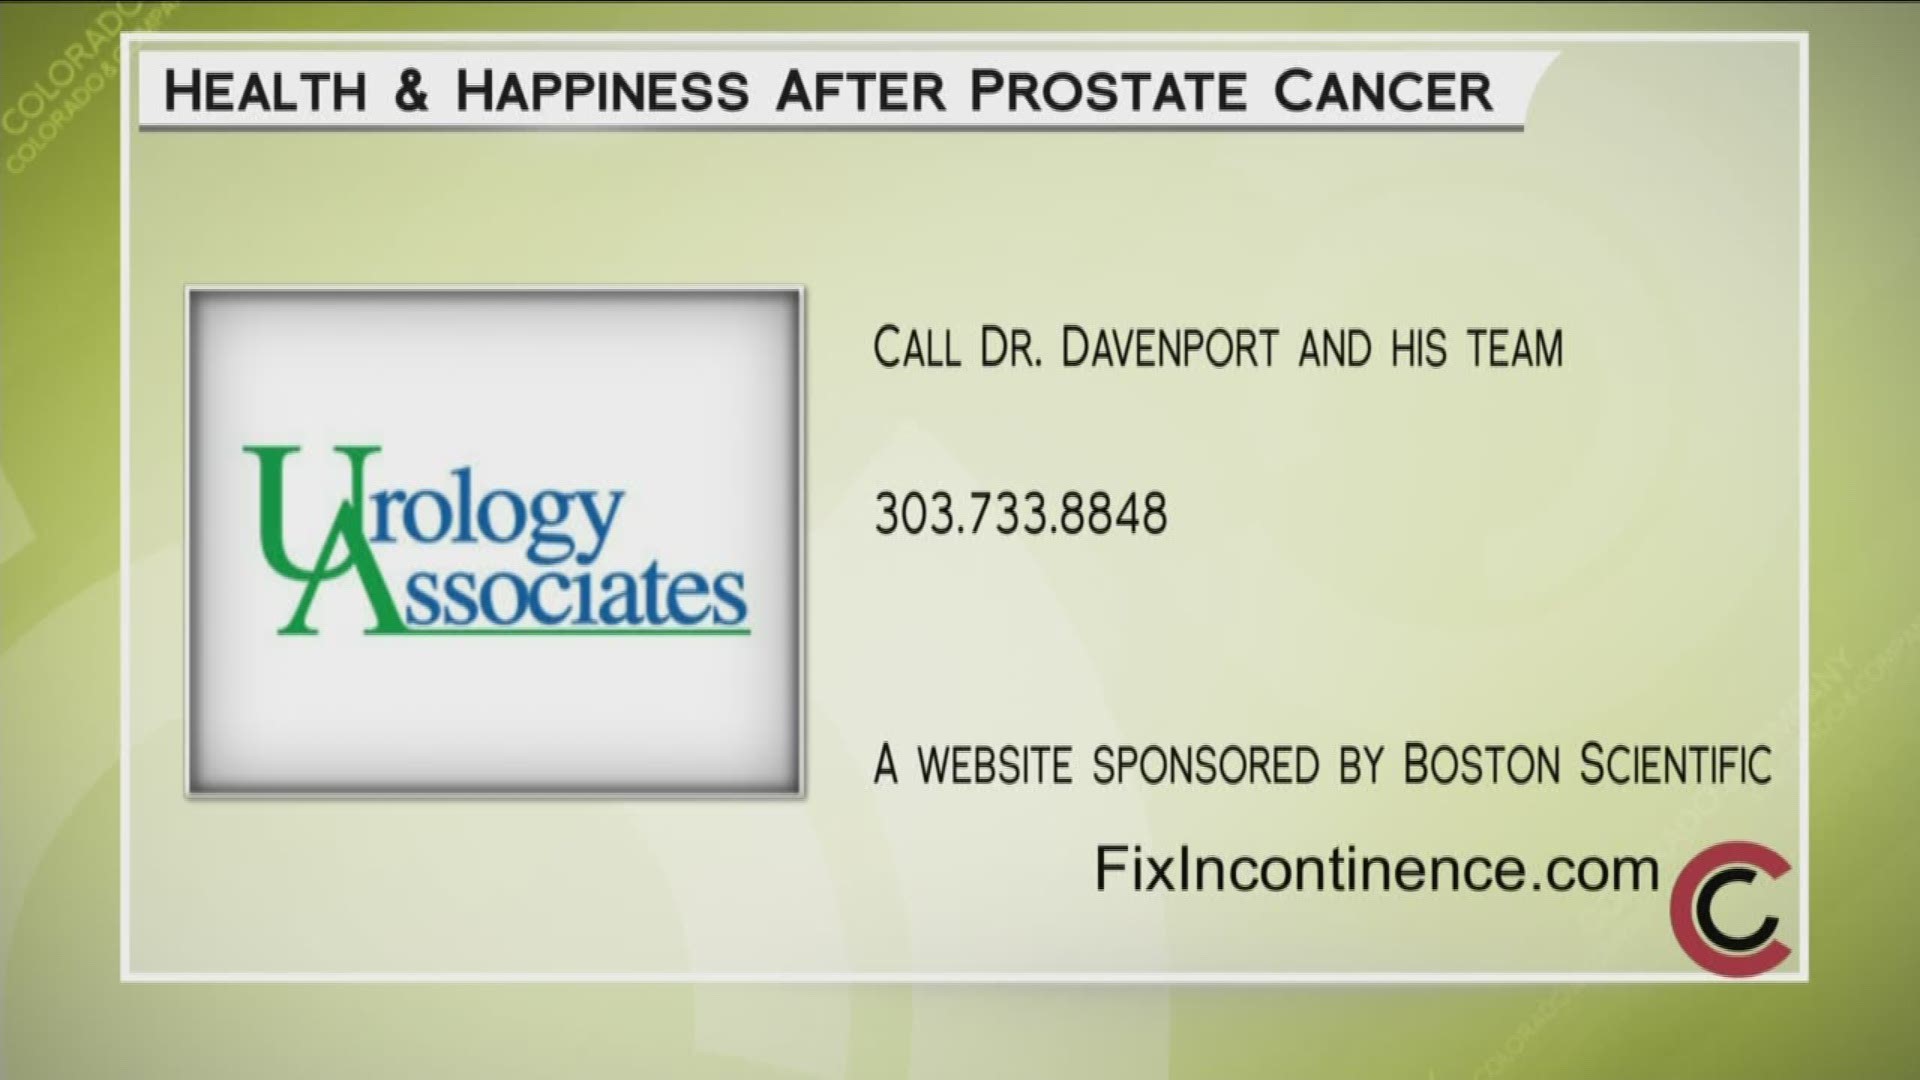 Visit FixIncontinence.com to learn more about the products mentioned. Call Dr. Davenport at Urology Associates at 303.733.8848 to see if their services can help you.